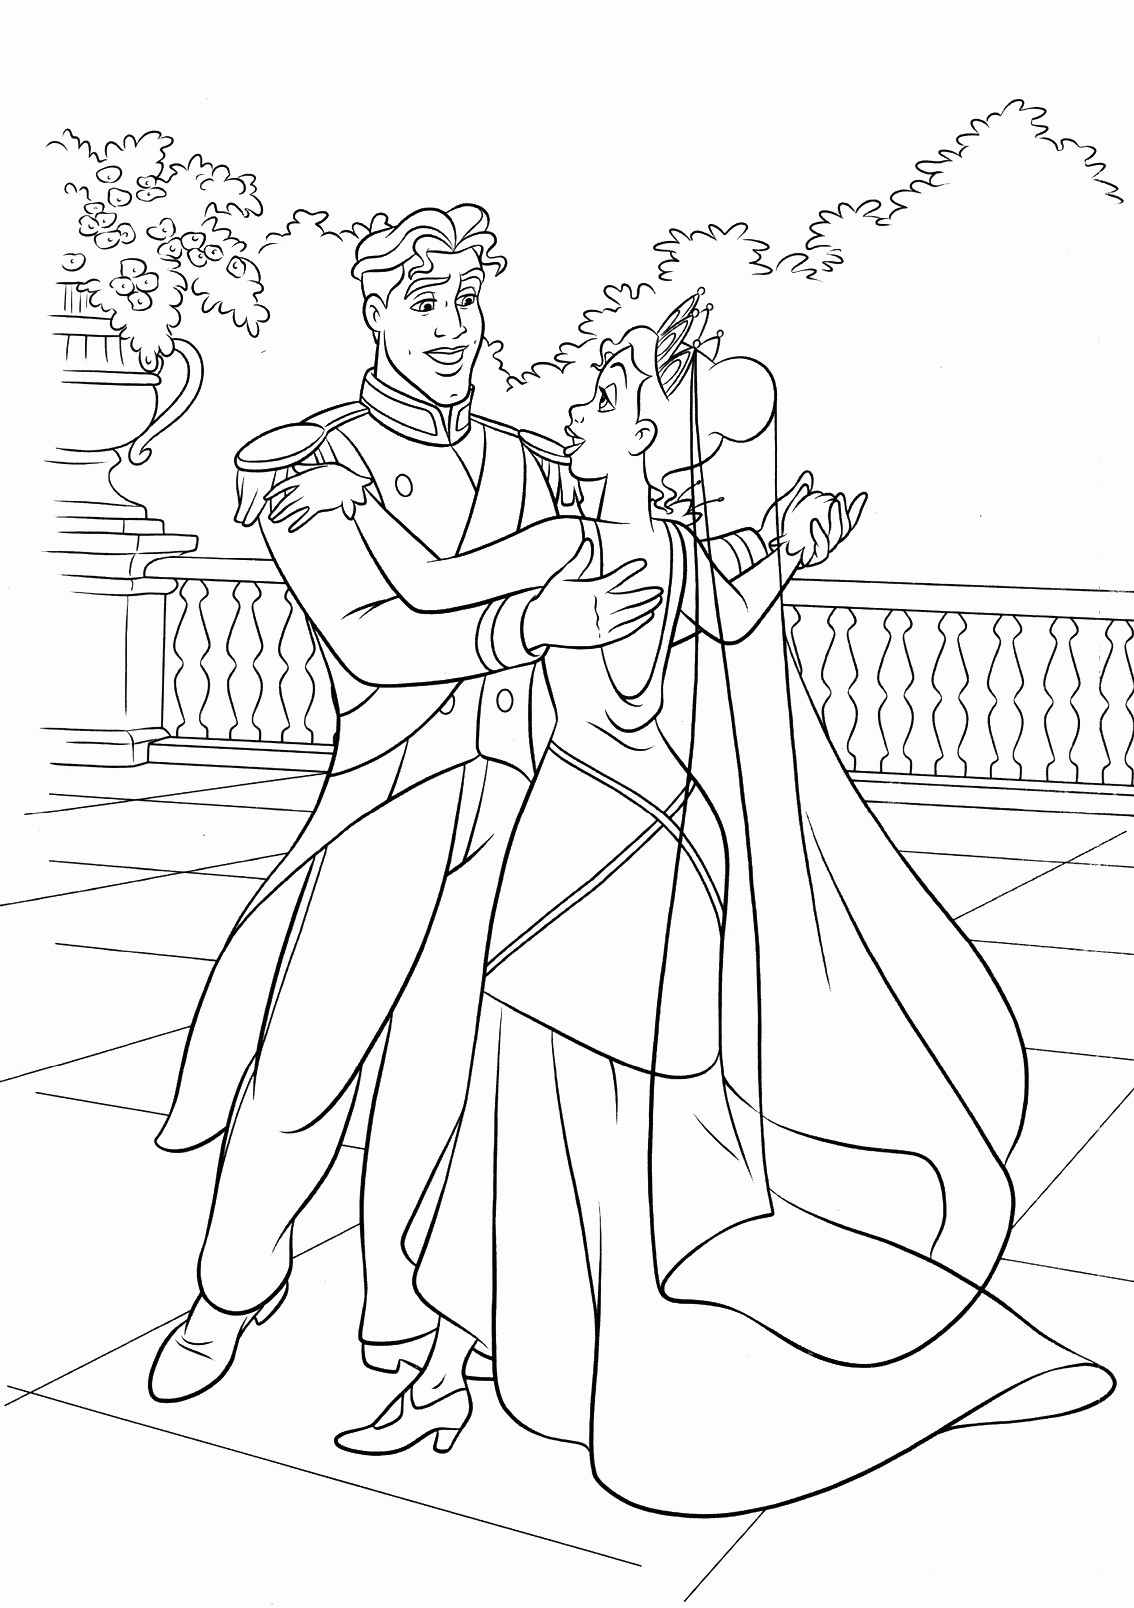 Wedding Coloring Page
 Wedding Coloring Pages Best Coloring Pages For Kids